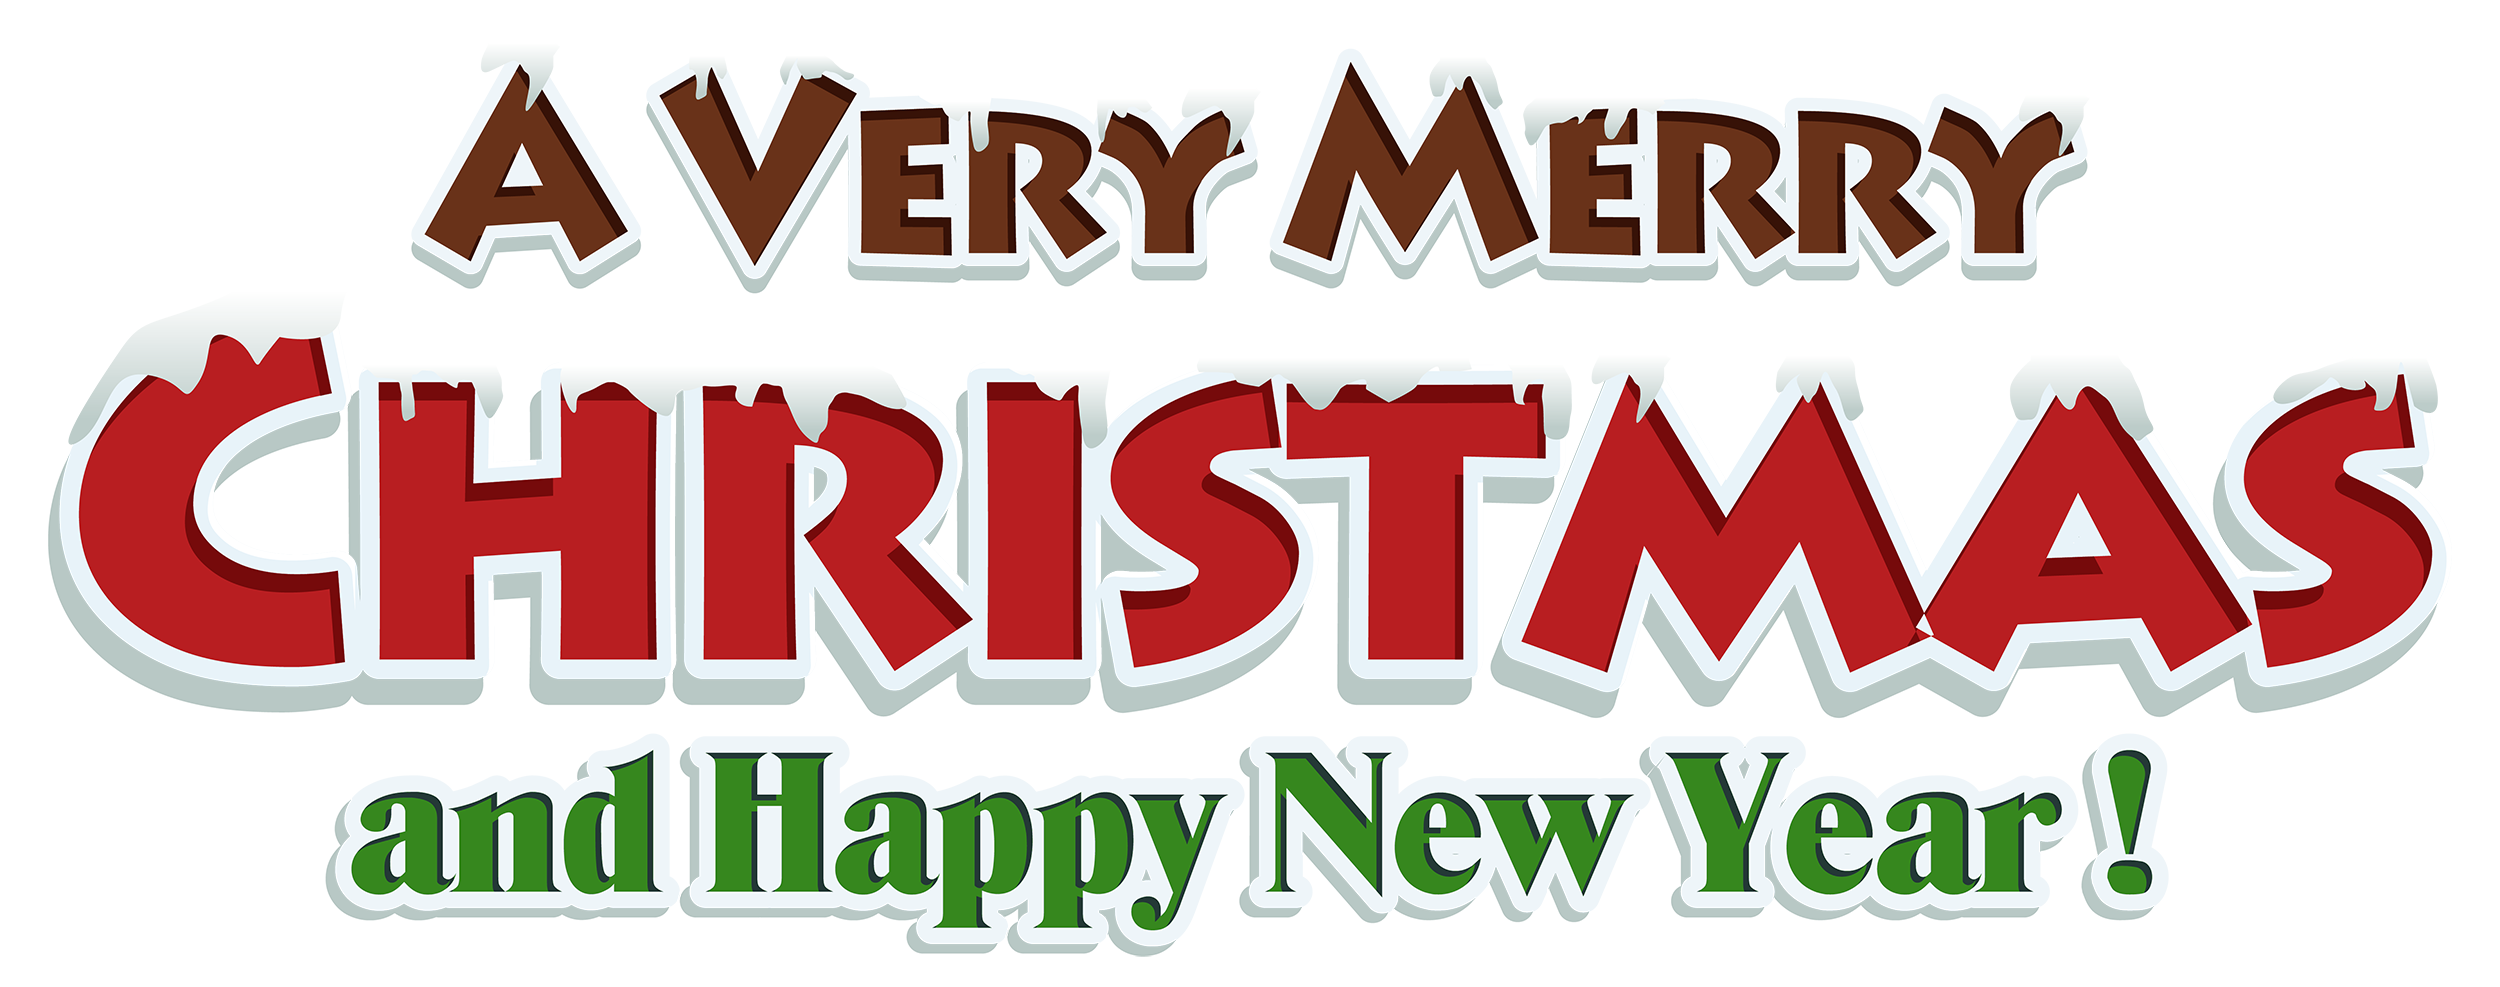 Merry Christmas Text Design PNG Image